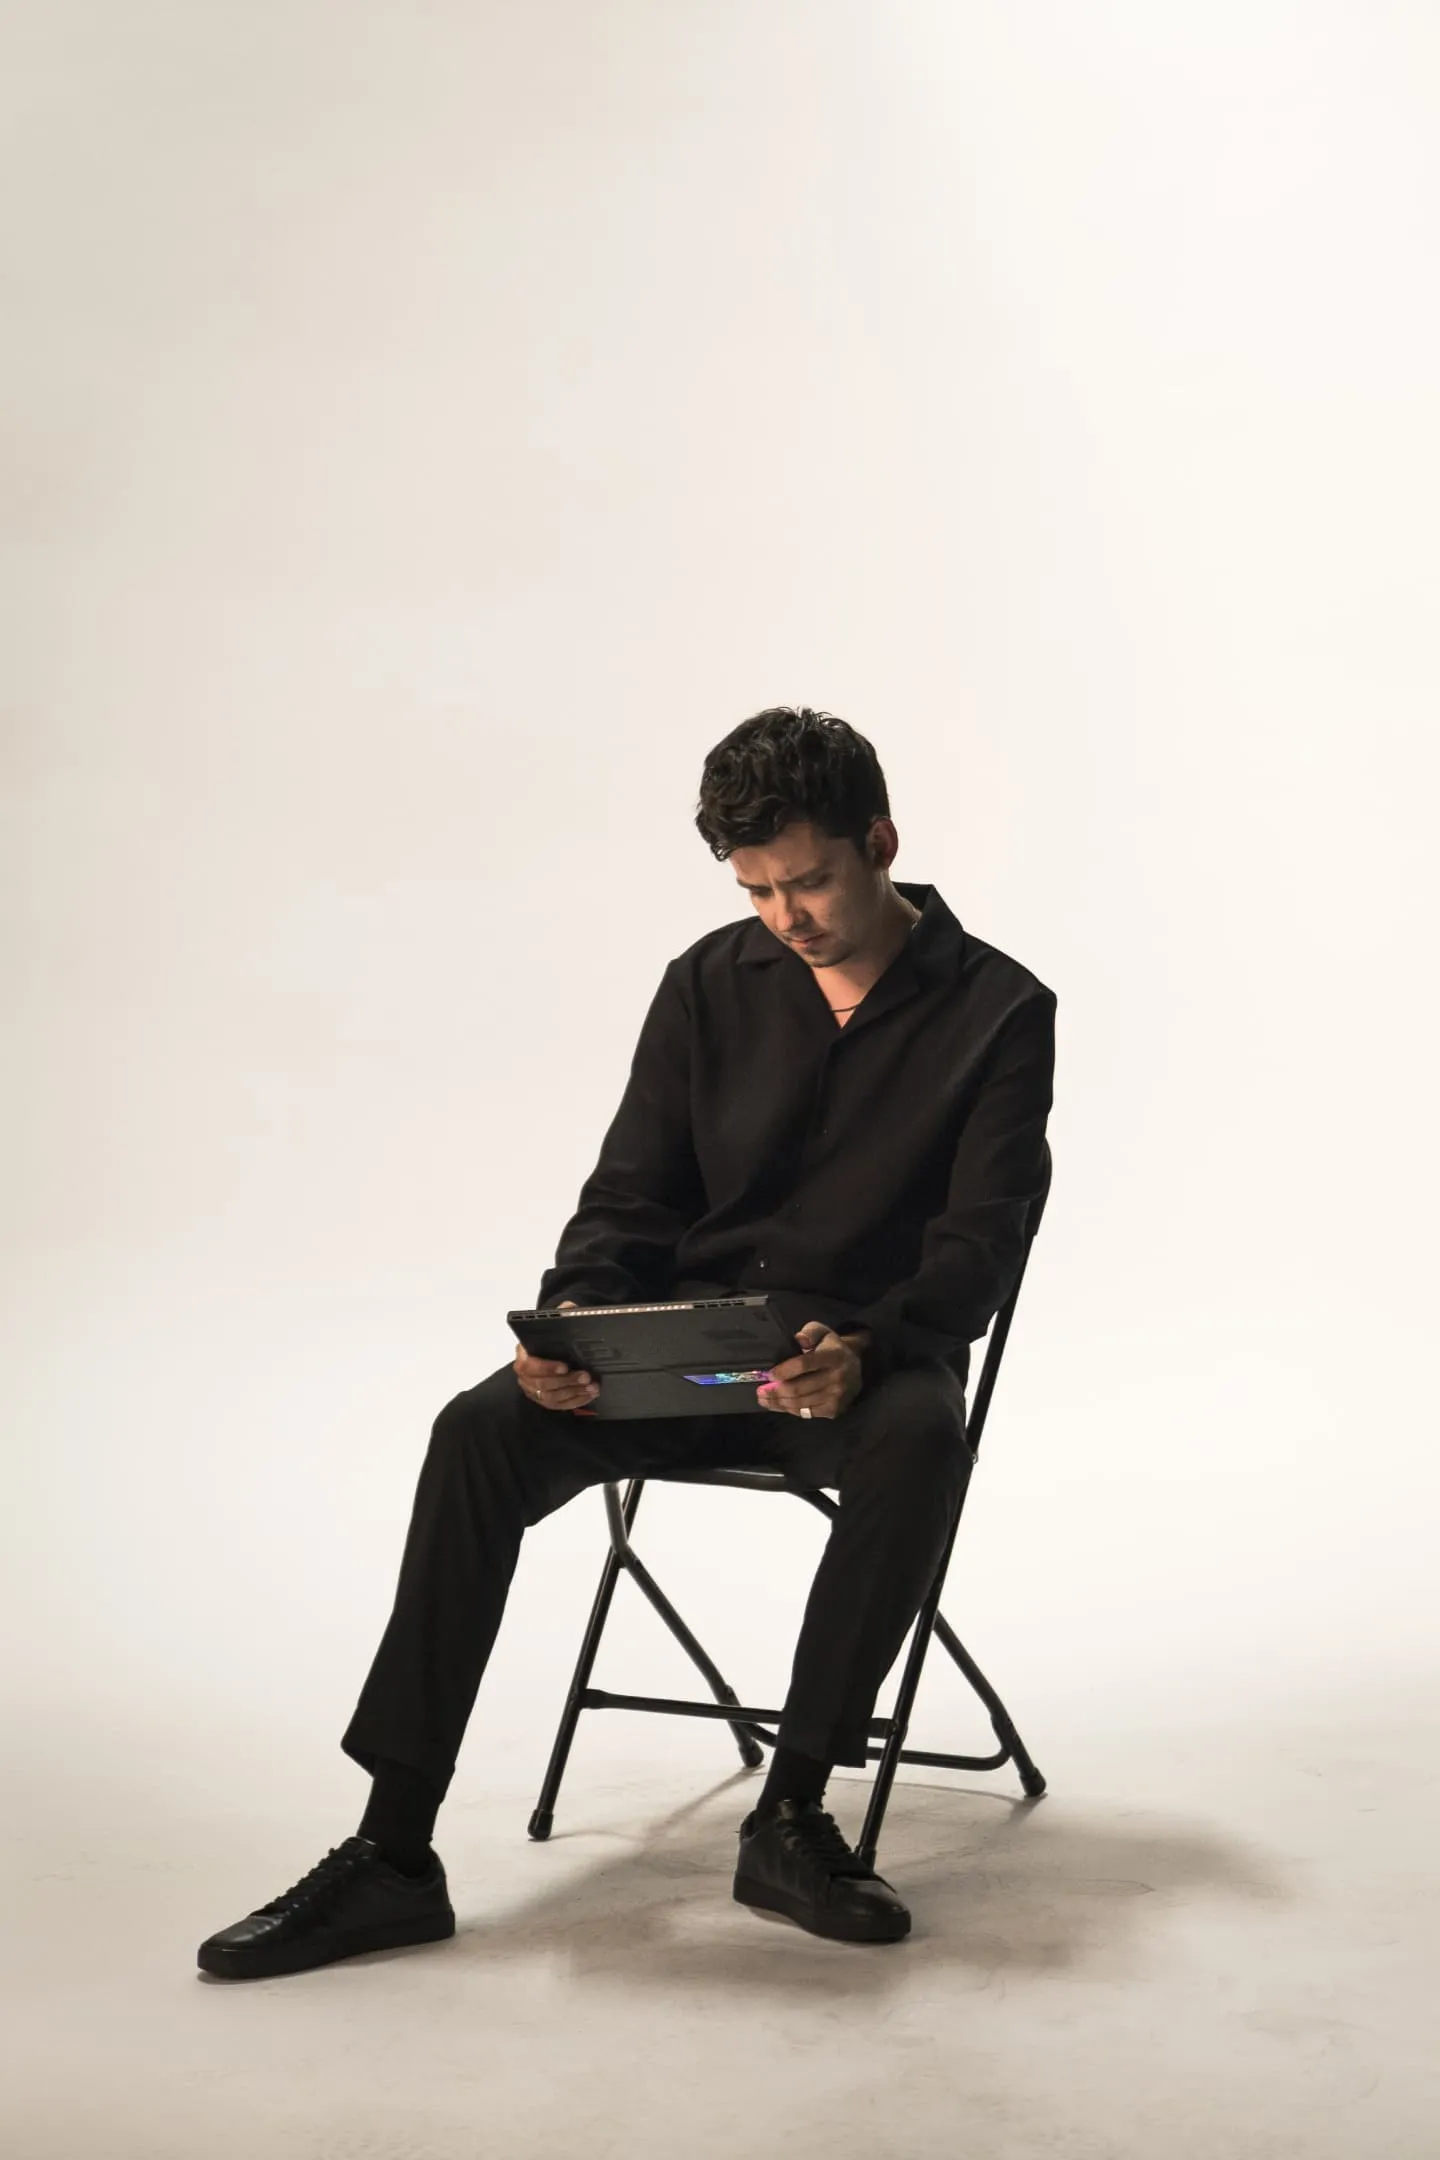 Asa Butterfield sitting on a chair in front of a white background, looking at a Flow Z13 as he’s using it.